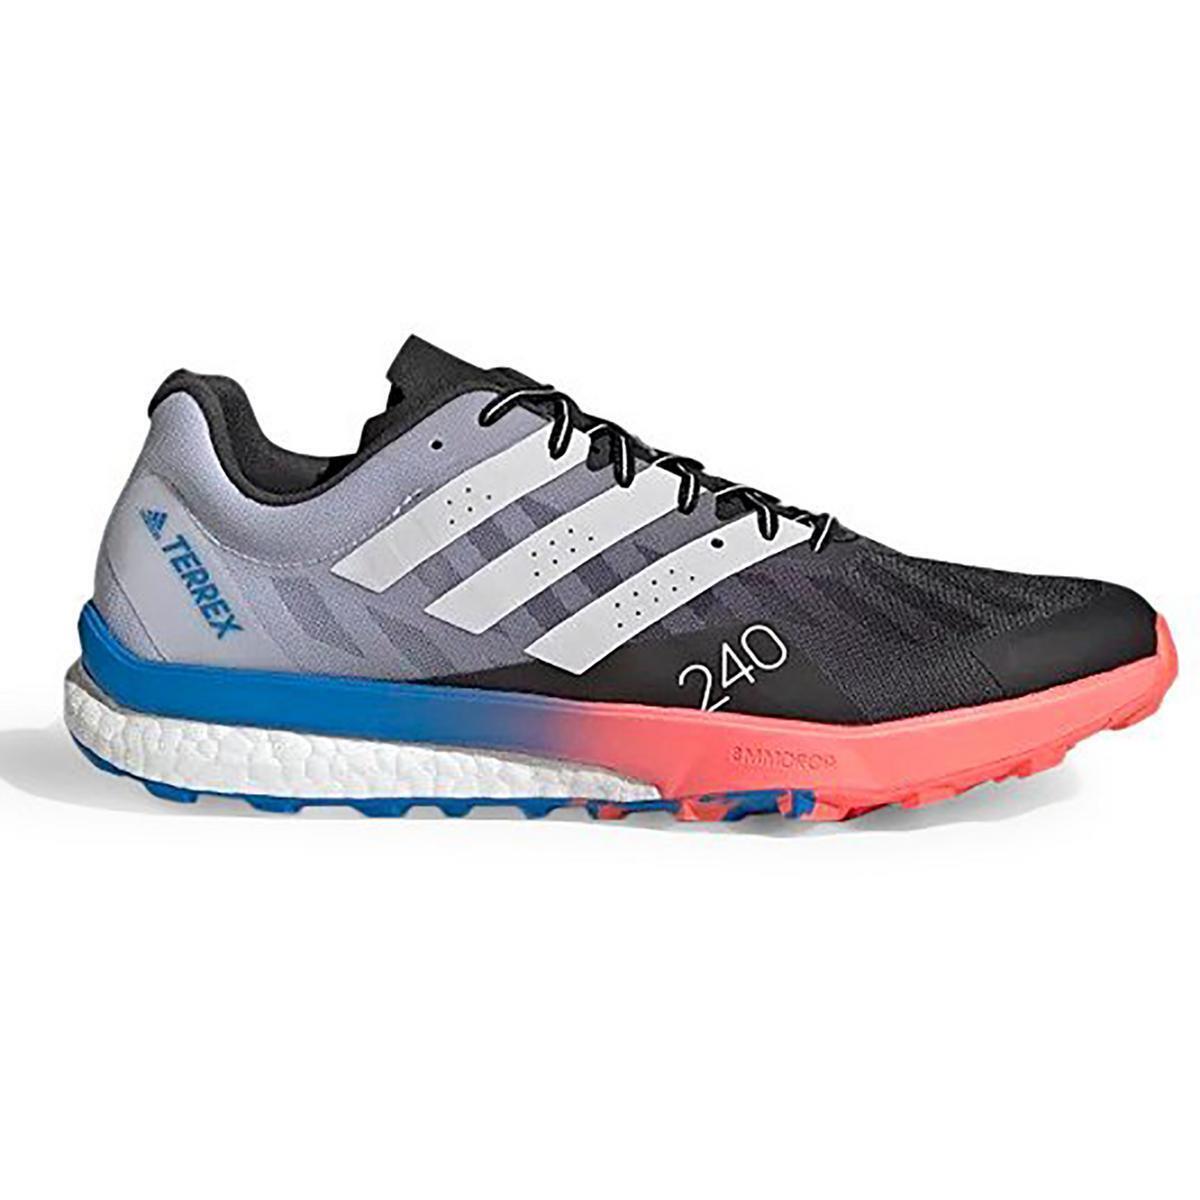 Adidas Mens Terrex Speed Ultra Trail Running Training Shoes Sneakers Bhfo 3223 - White/Gray/Coral